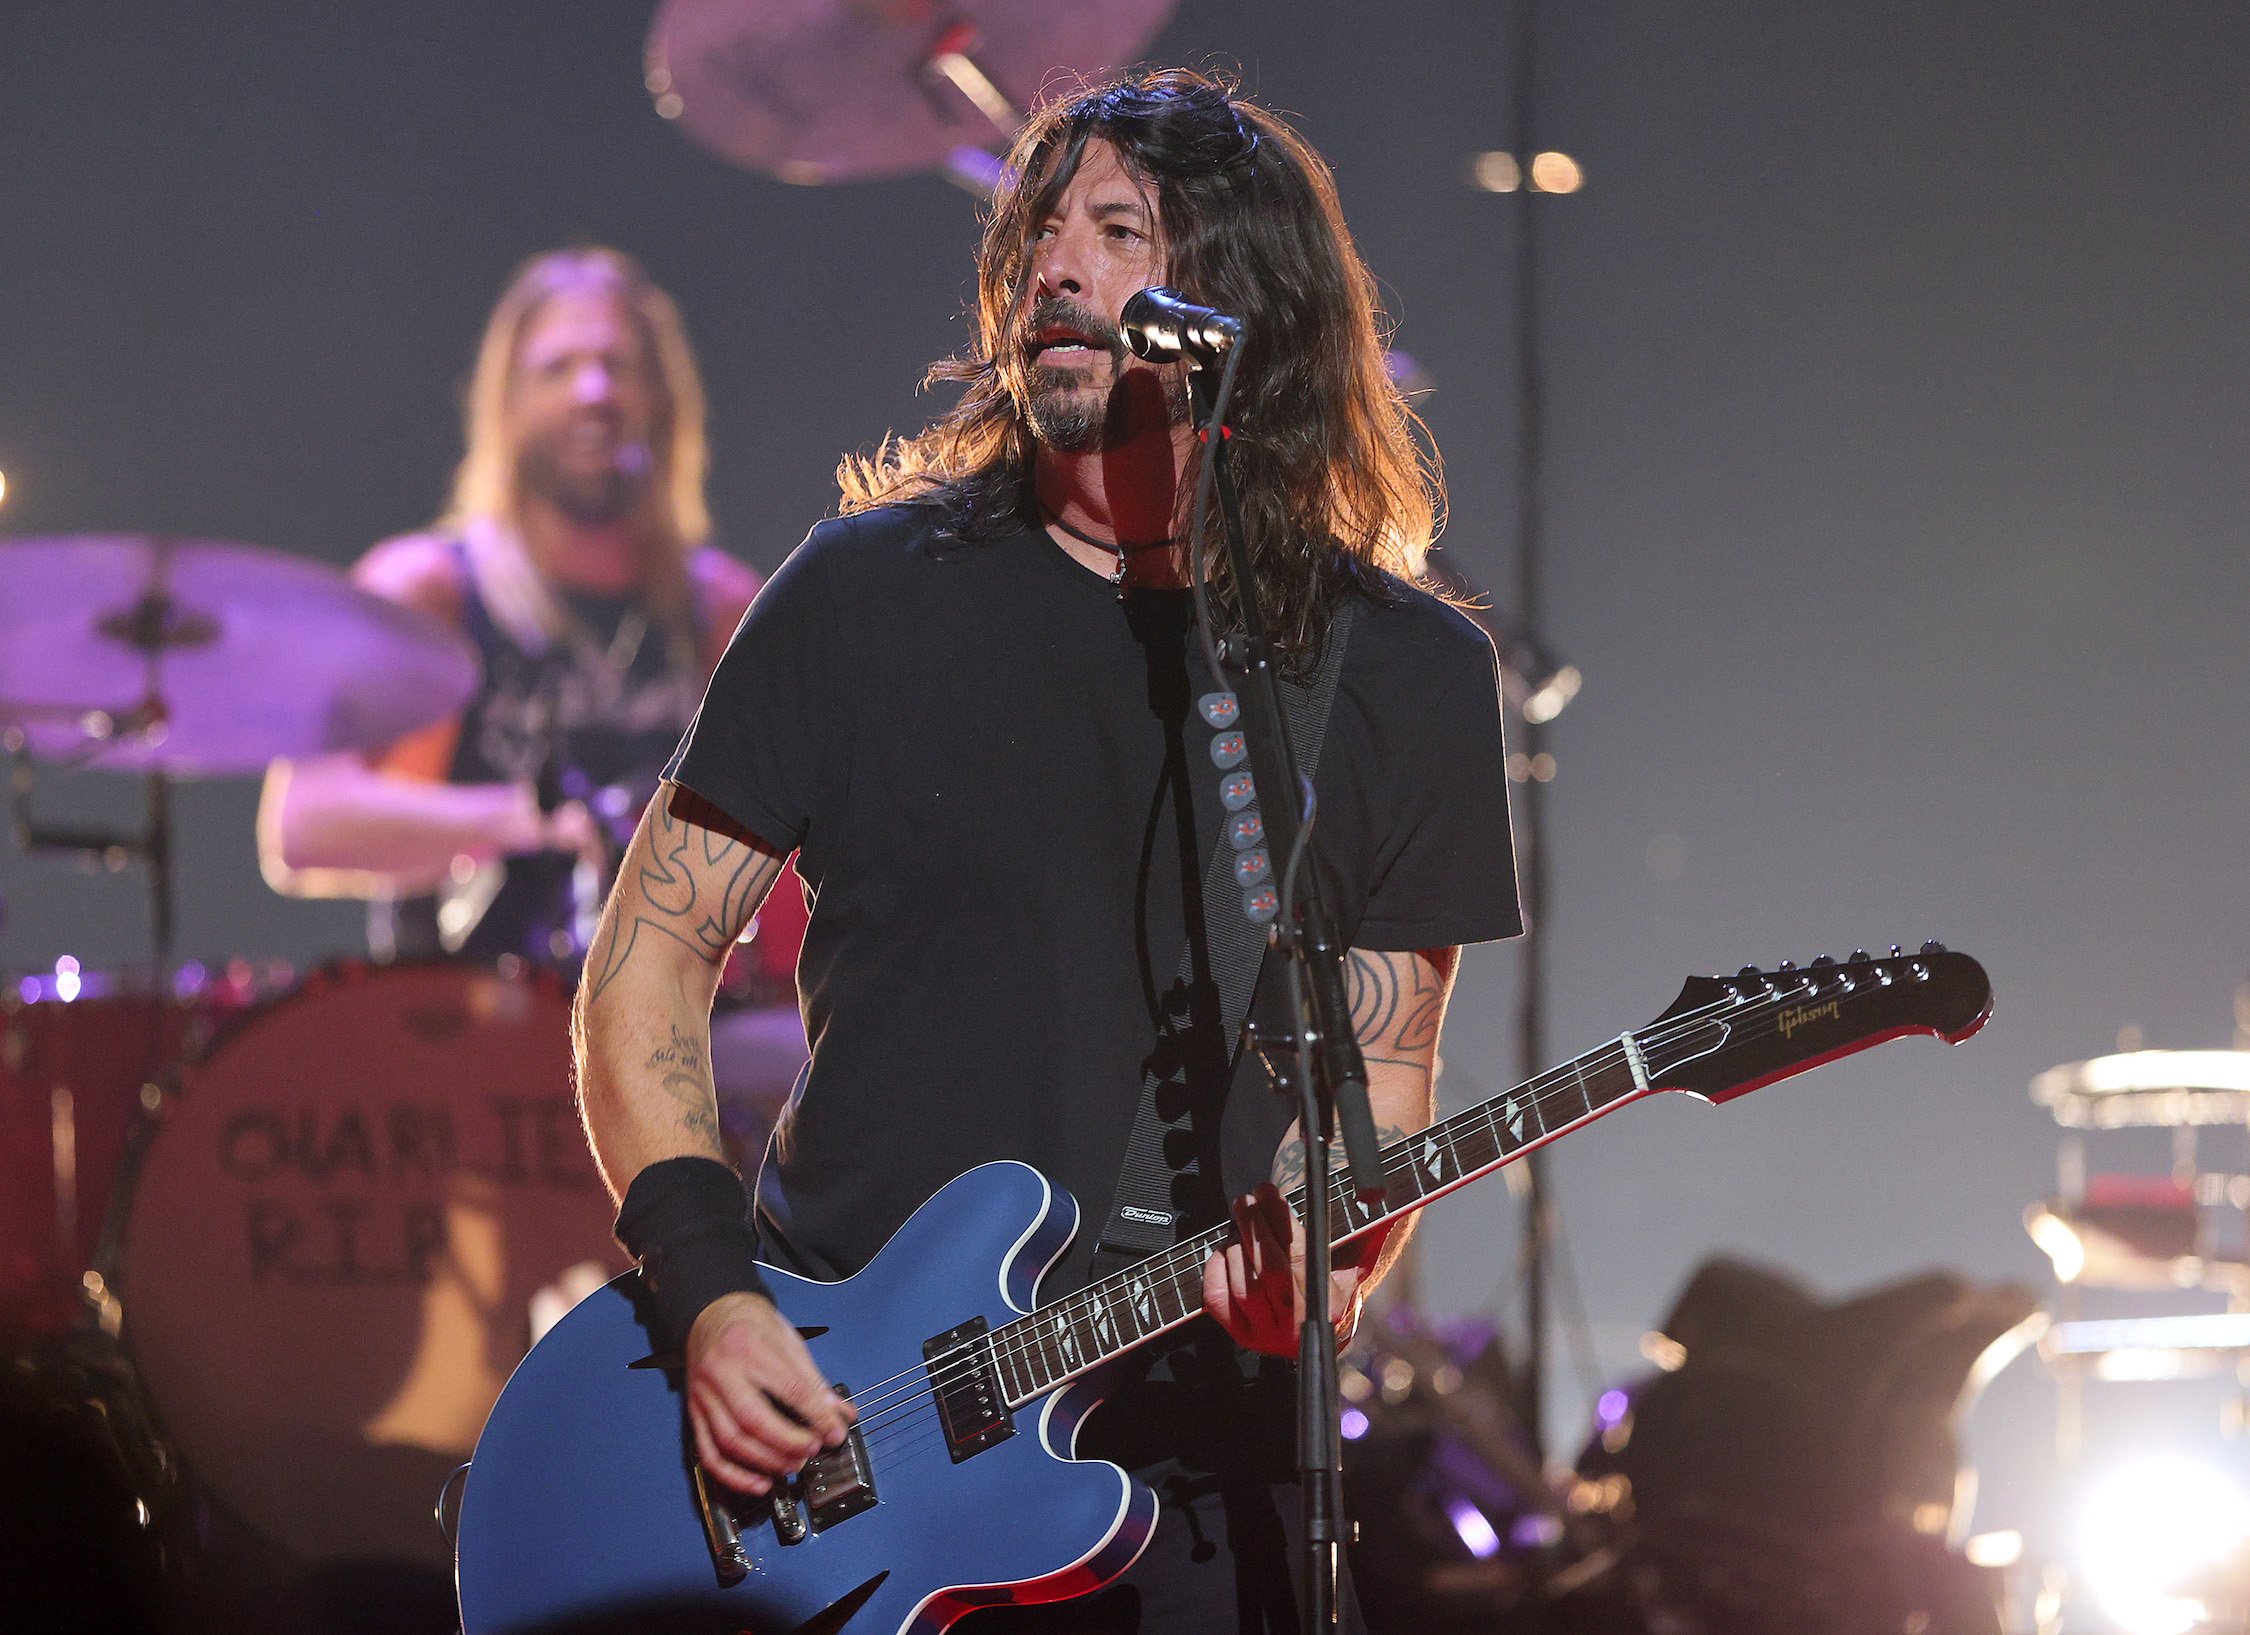 Dave Grohl performs at the 2021 MTV Video Music Awards in New York City